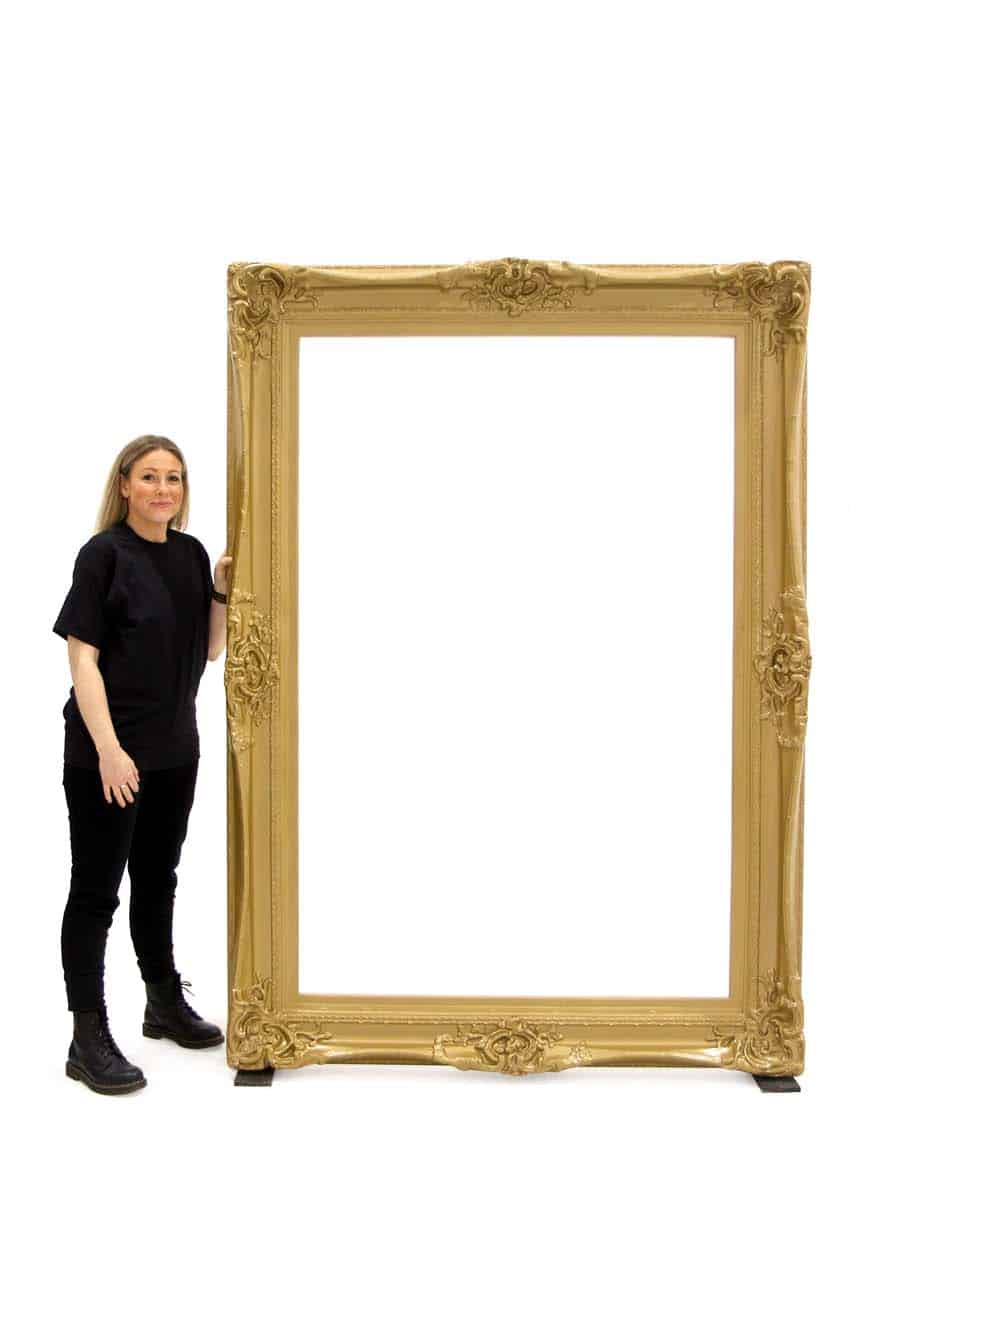 https://www.eventprophire.com/wp-content/uploads/2022/05/SN8970_Giant-Gold-Frame-NEW_event_prop_hire_EPH_Creative_526_optimised.jpg